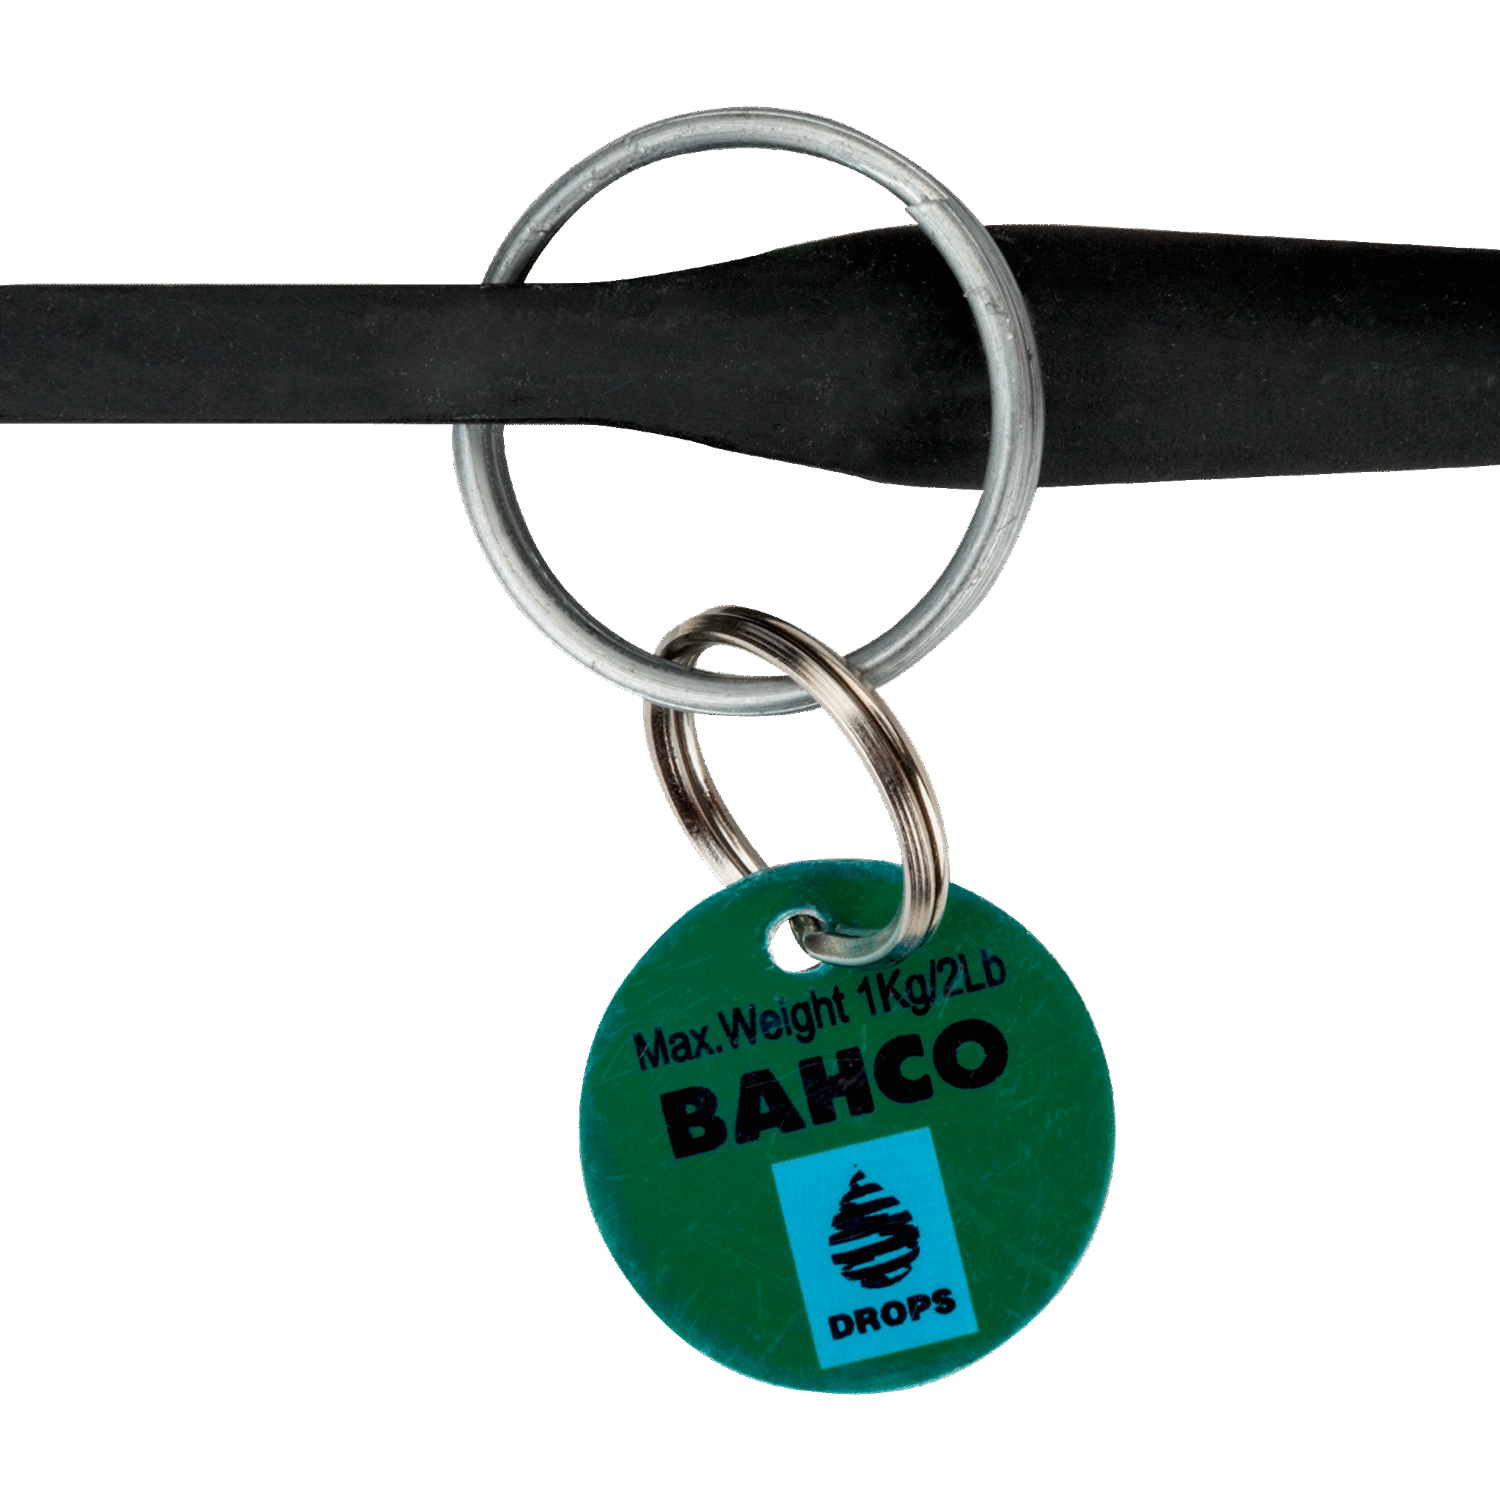 BAHCO TAHSC2RM Ratchet Wrench with Safety Ring and Dee Shackle - Premium Ratchet Wrench from BAHCO - Shop now at Yew Aik.